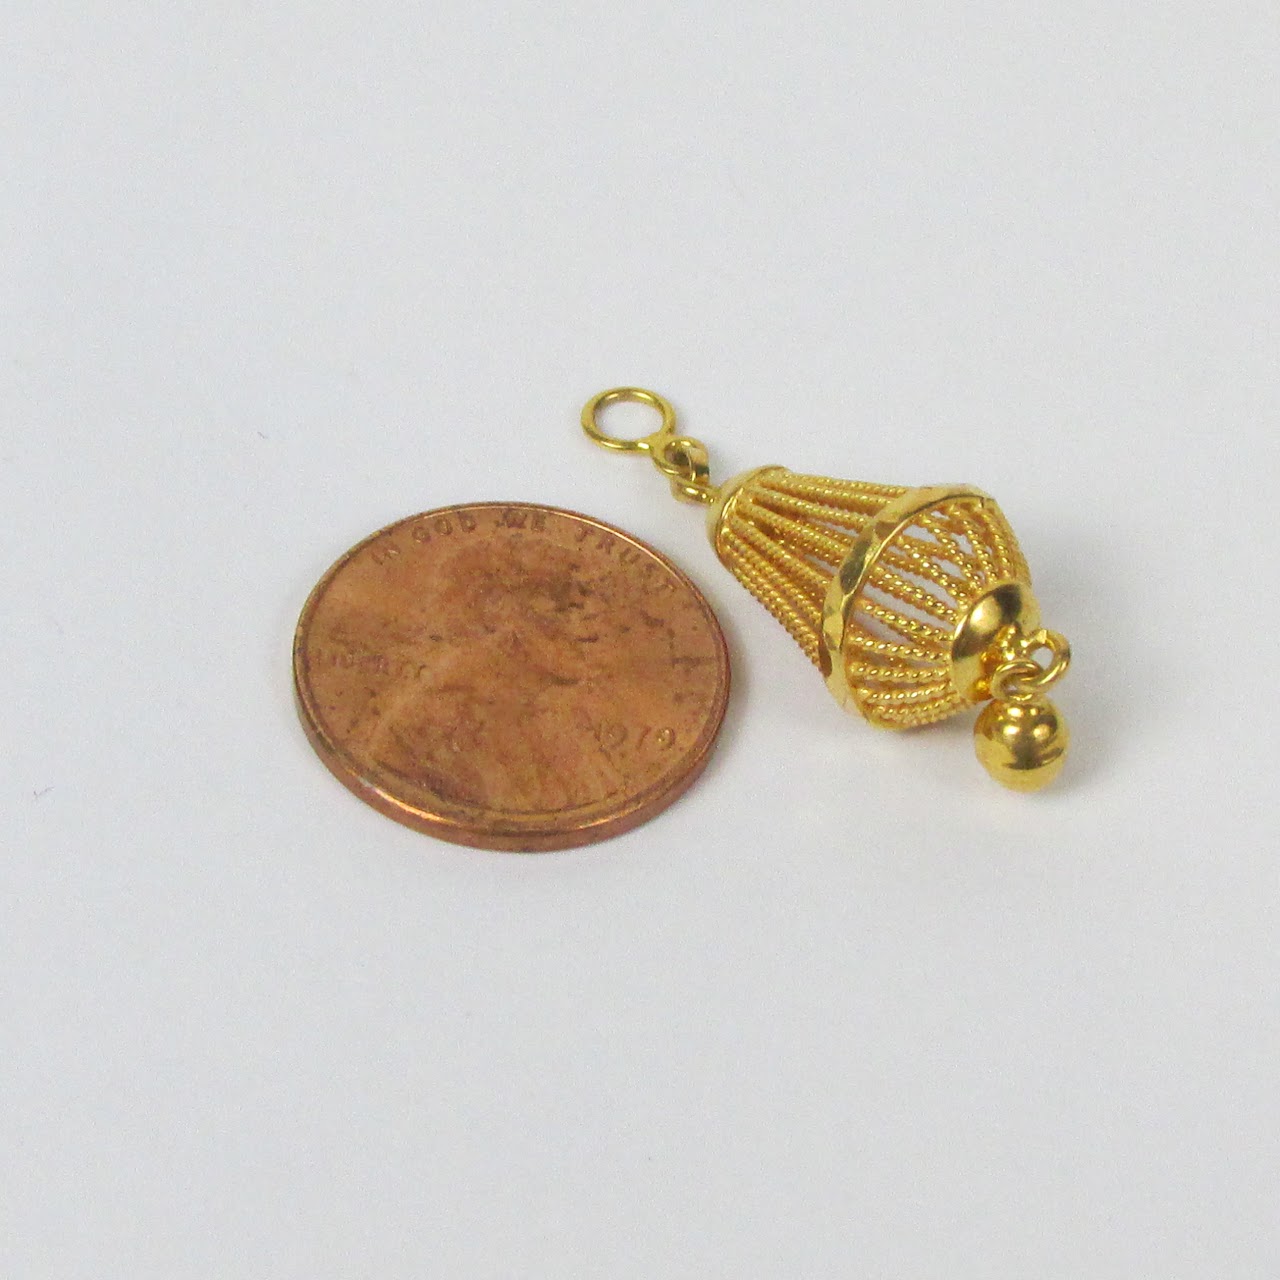 22K Gold Caged Bead Charm